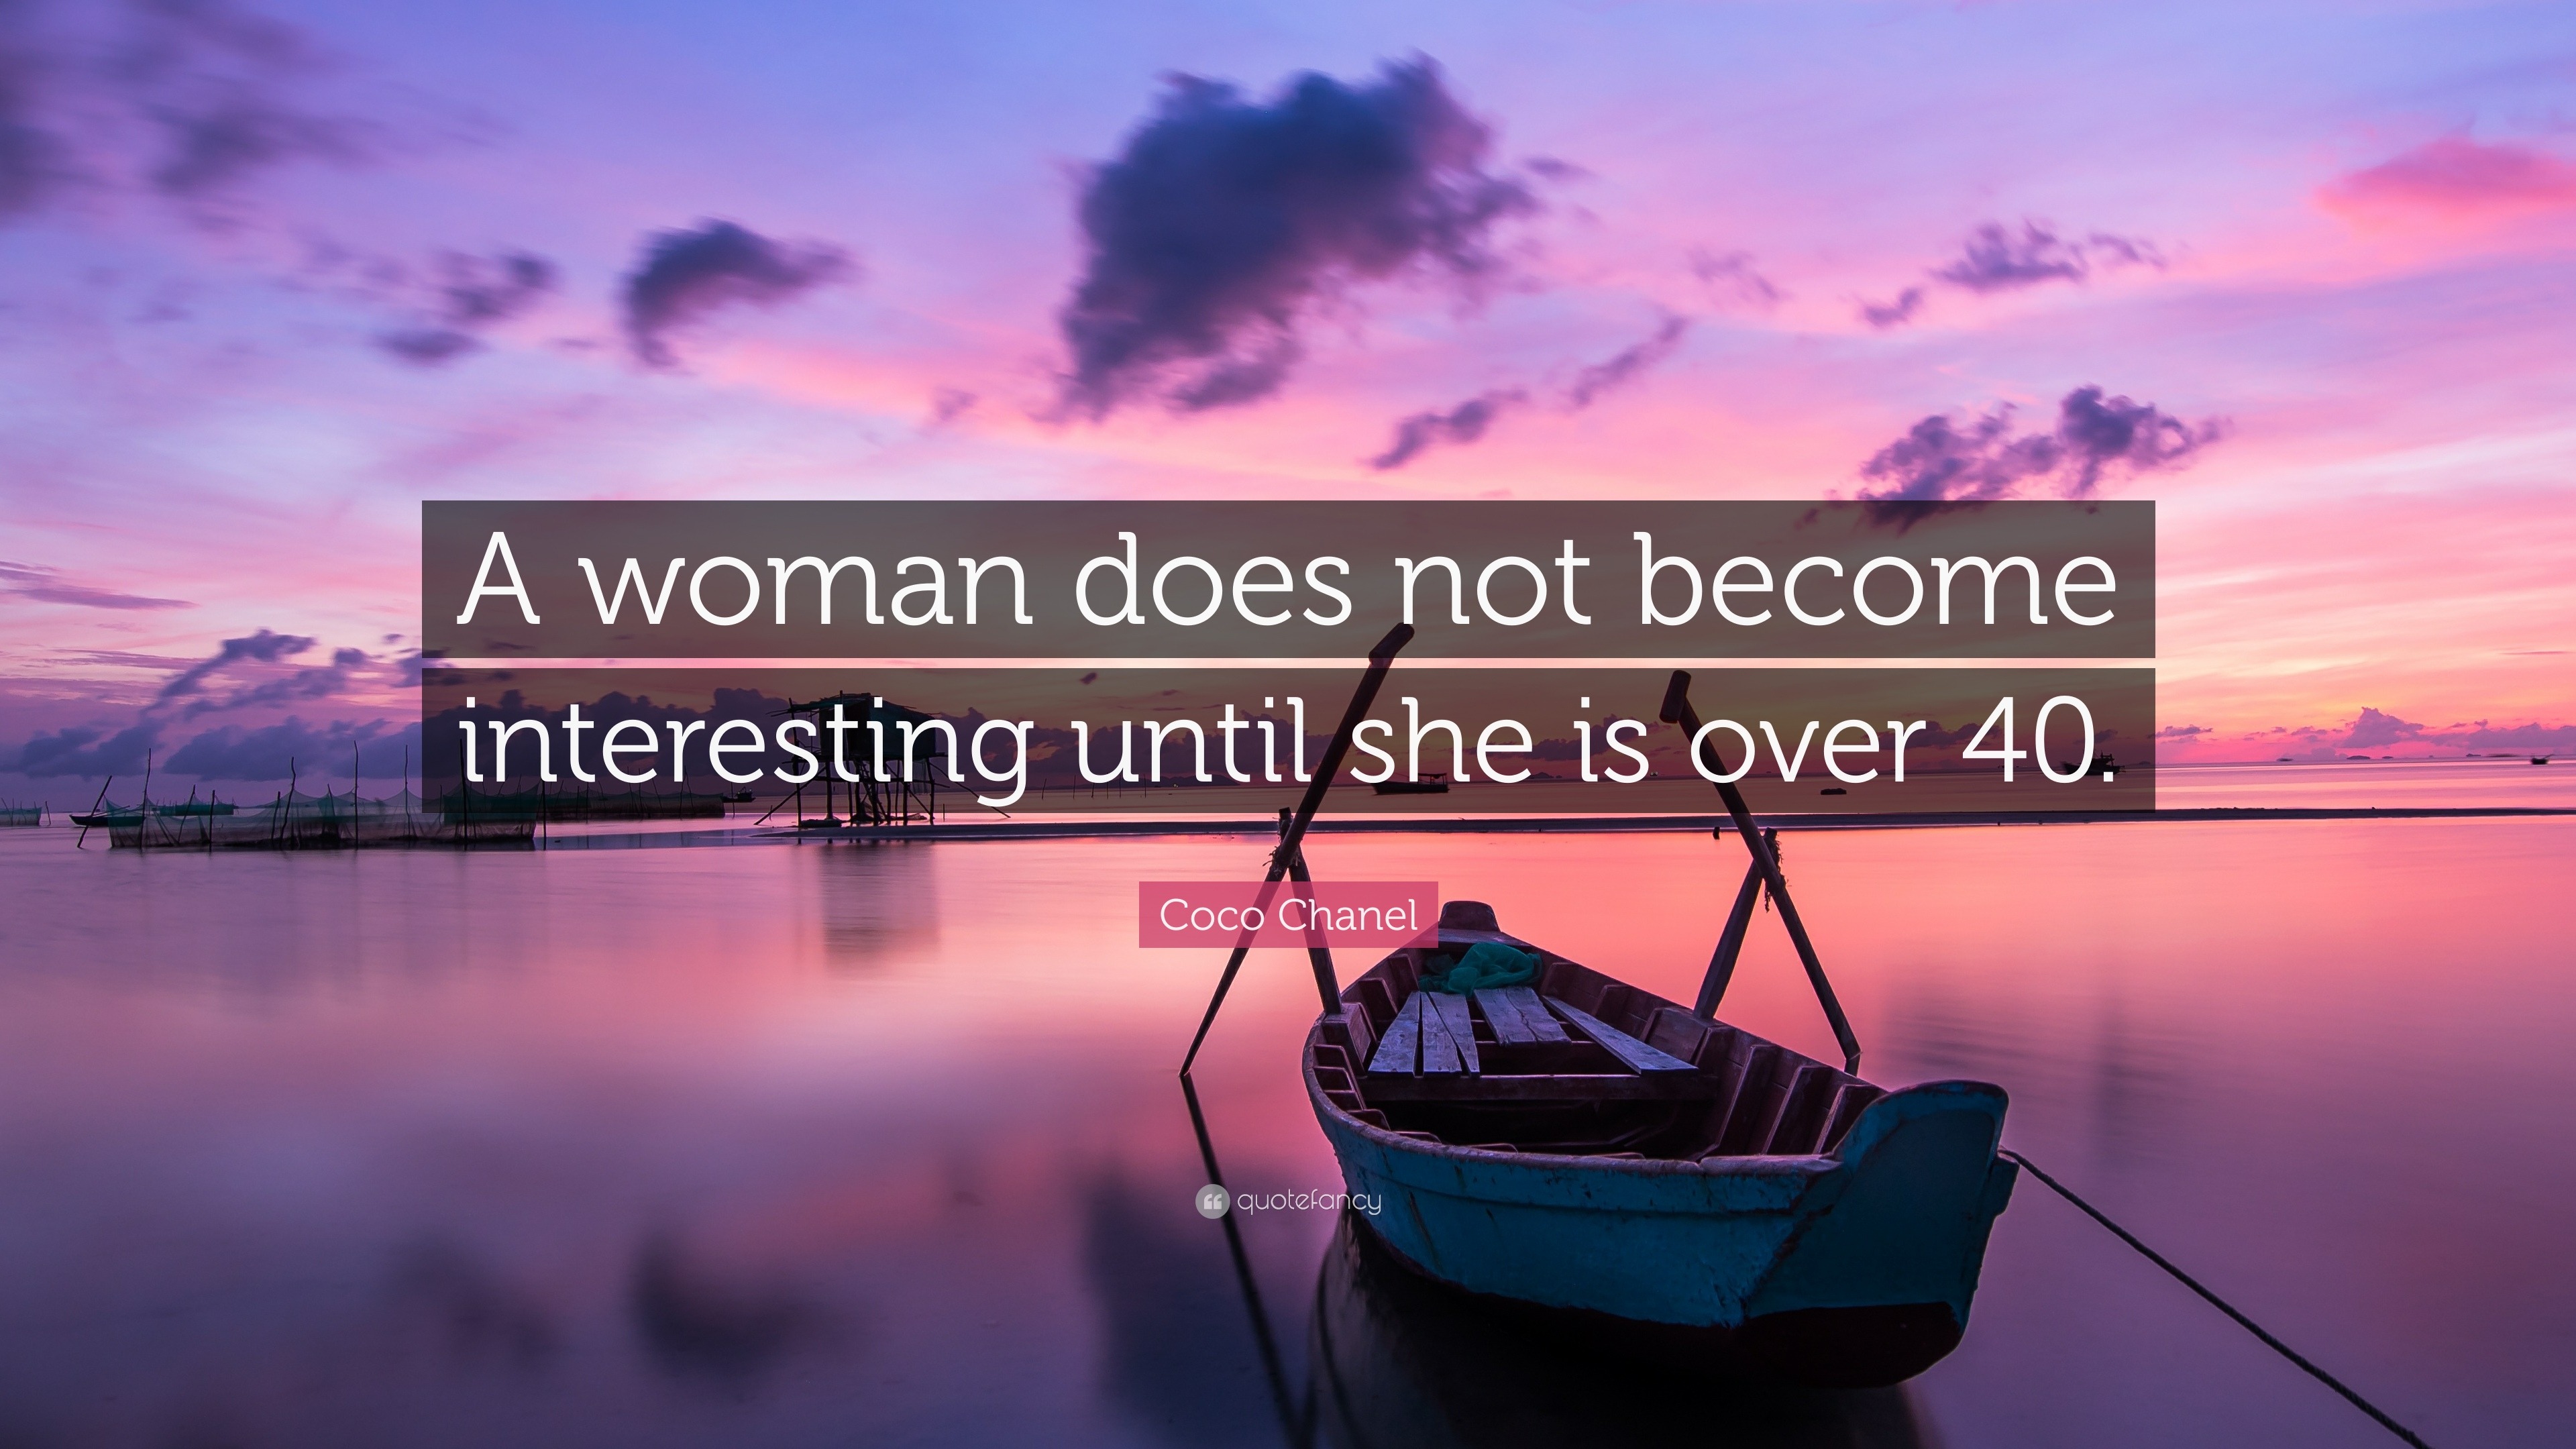 Coco Chanel Quote: “A woman does not become interesting until she is over 40 .”